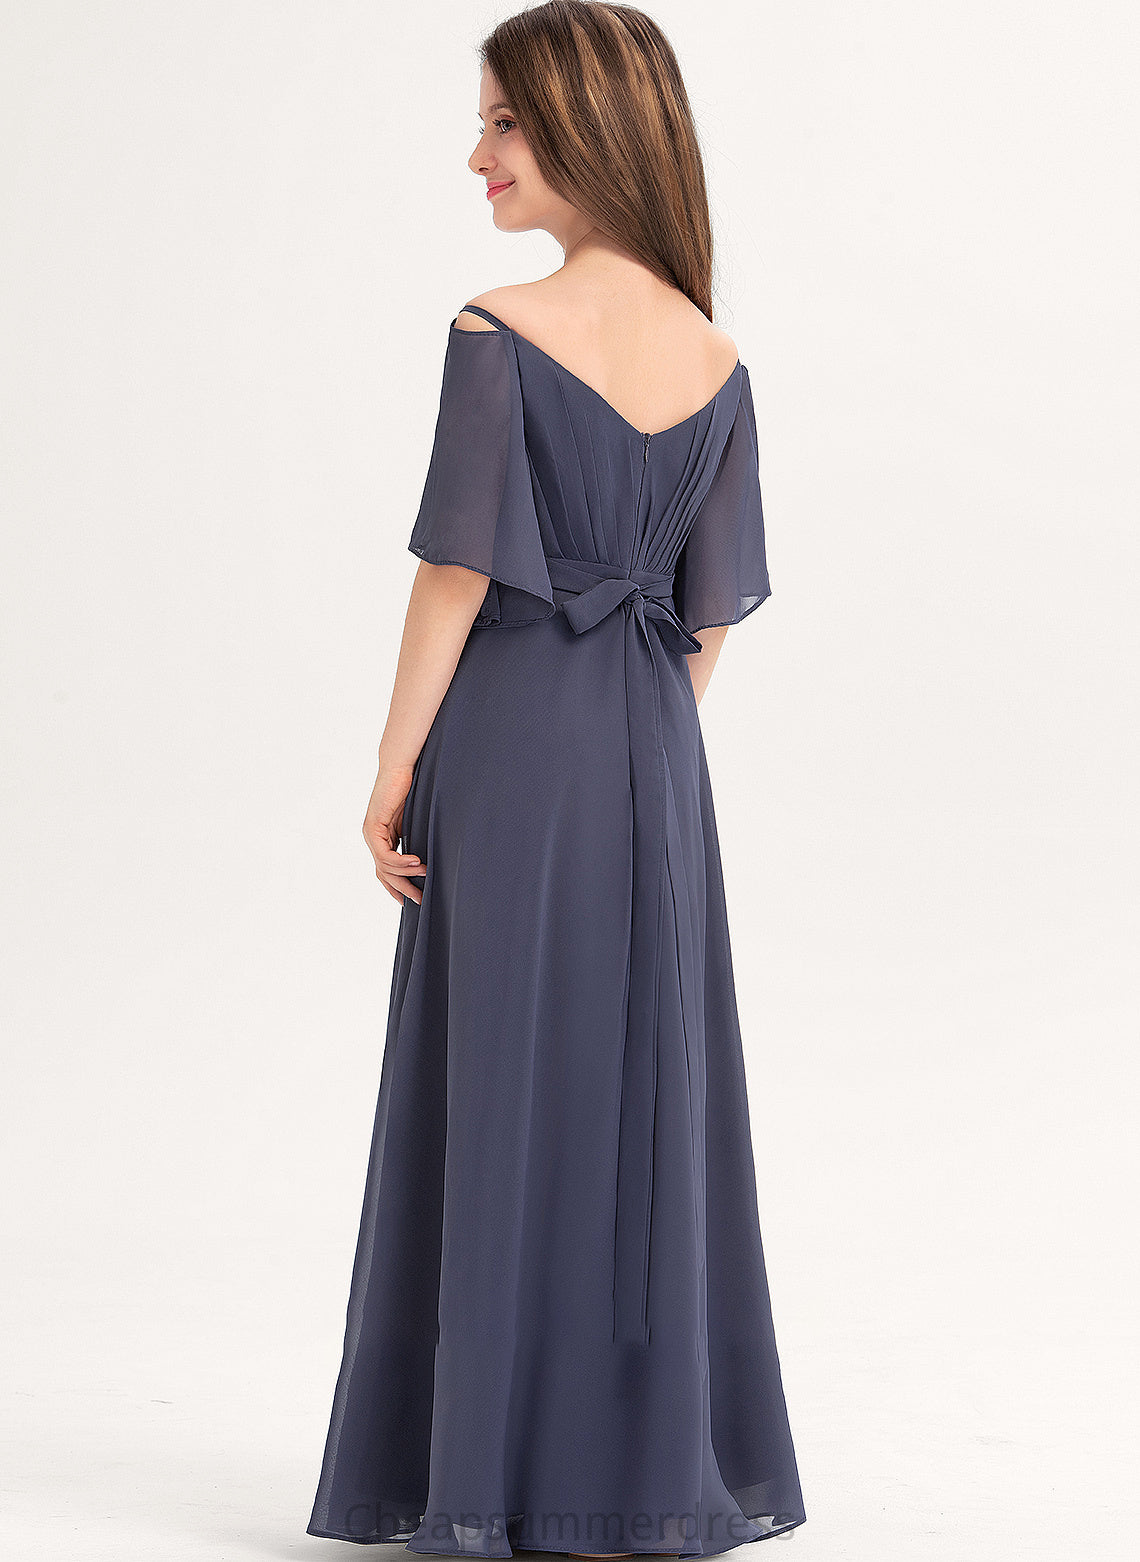 Floor-Length Bow(s) Vanessa Chiffon Ruffle Junior Bridesmaid Dresses A-Line With Off-the-Shoulder